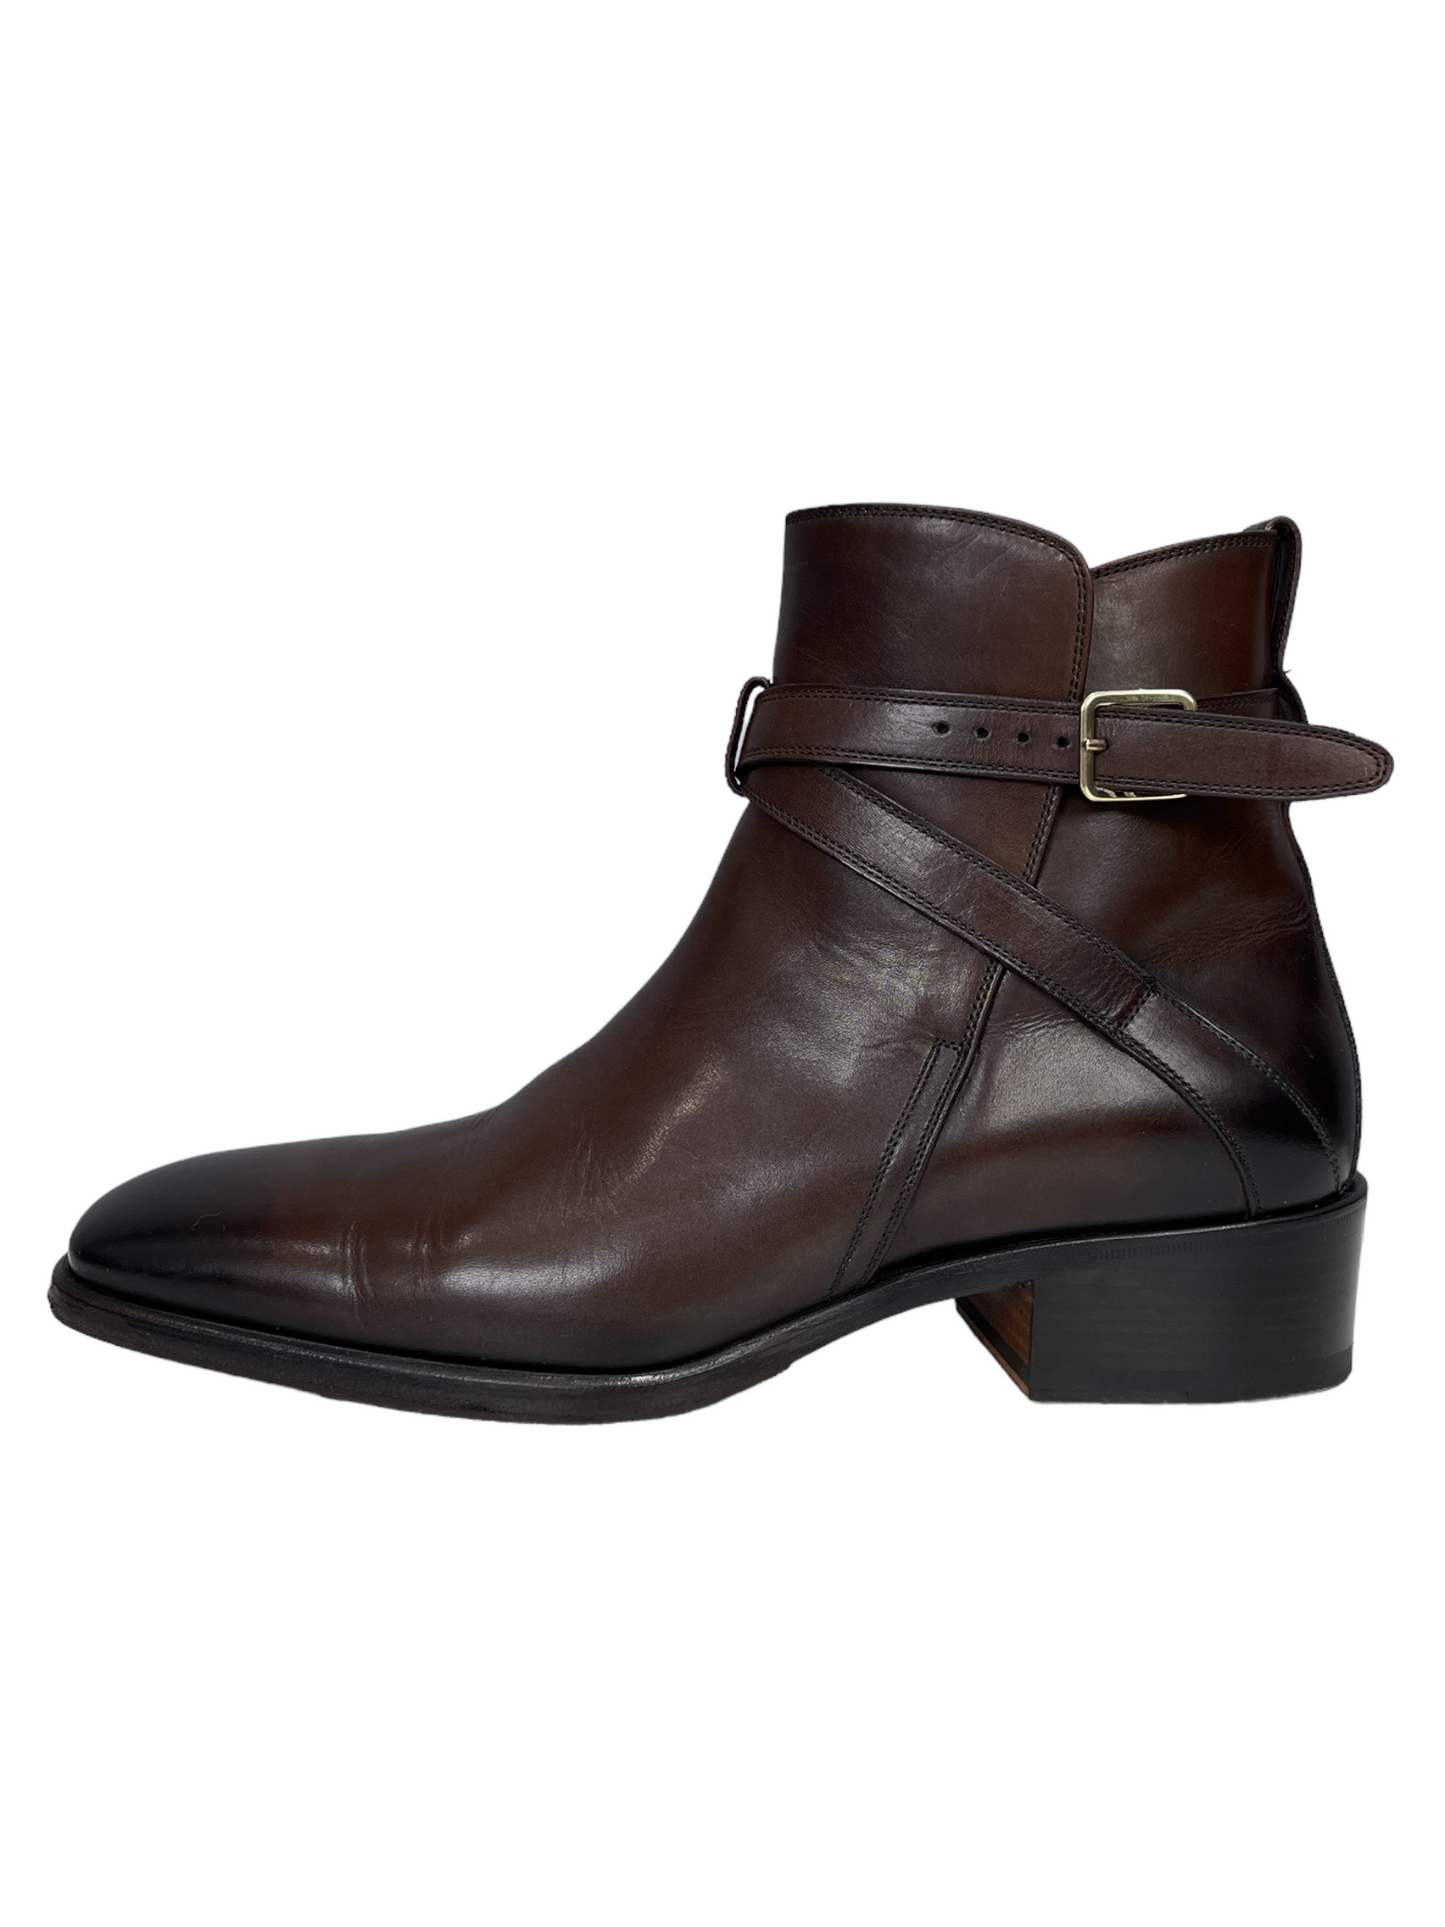 Tom Ford Brown Leather Jodhpur Boot 8 - Genuine Design Luxury Consignment Calgary, Alberta, Canada New and Pre-Owned Clothing, Shoes, Accessories.